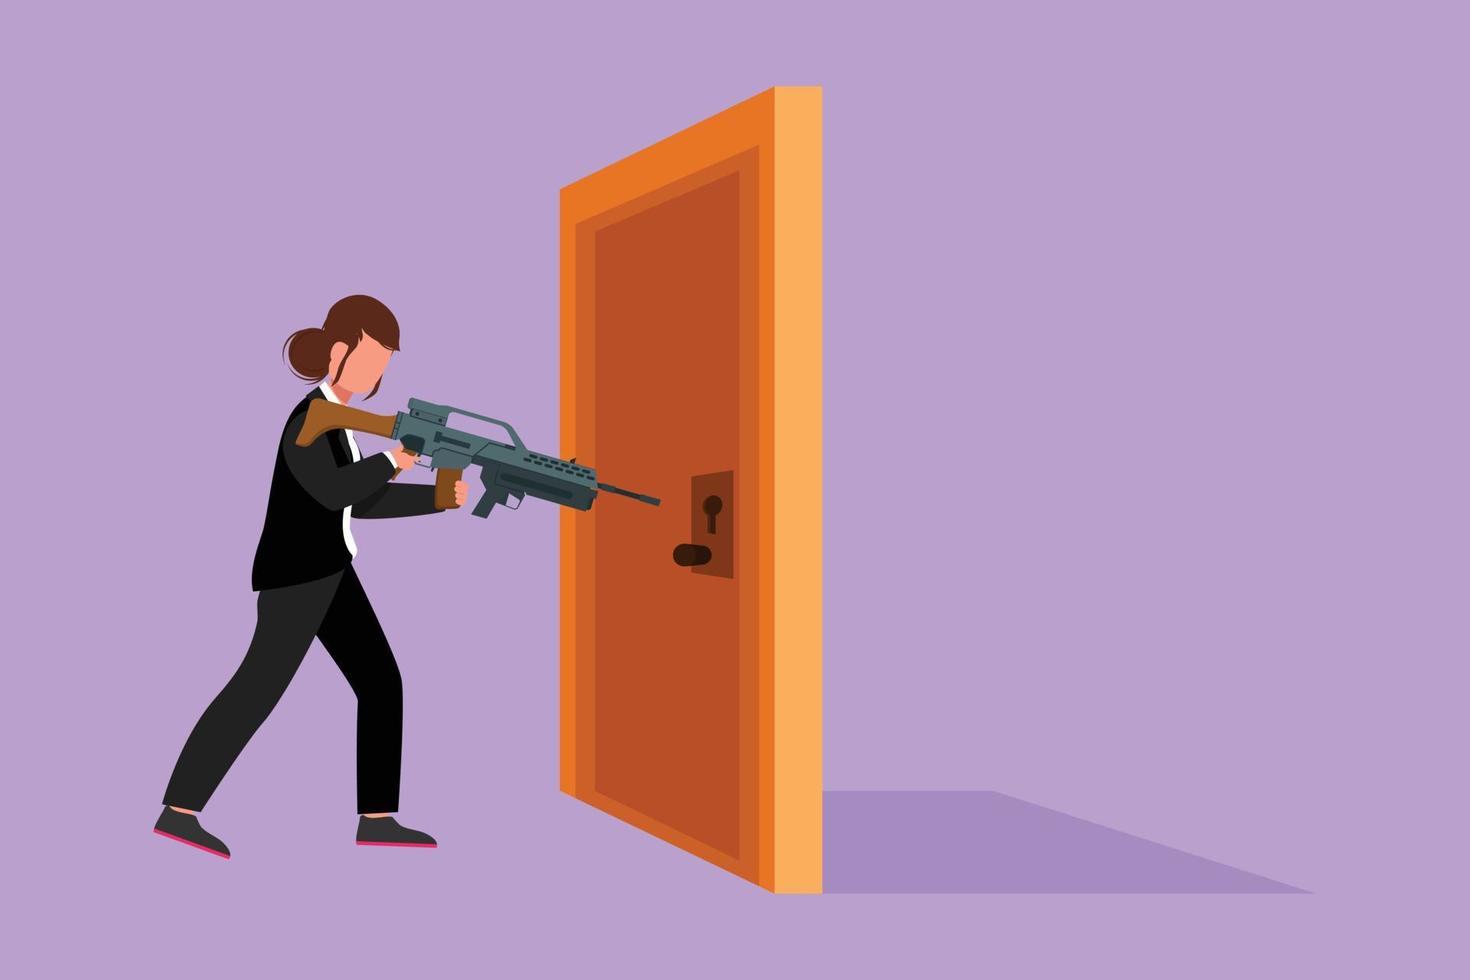 Cartoon flat style drawing businesswoman pointing shotgun at doorknob. Business breakthrough struggle. The power to succeed or winning competition. Open closed door. Graphic design vector illustration